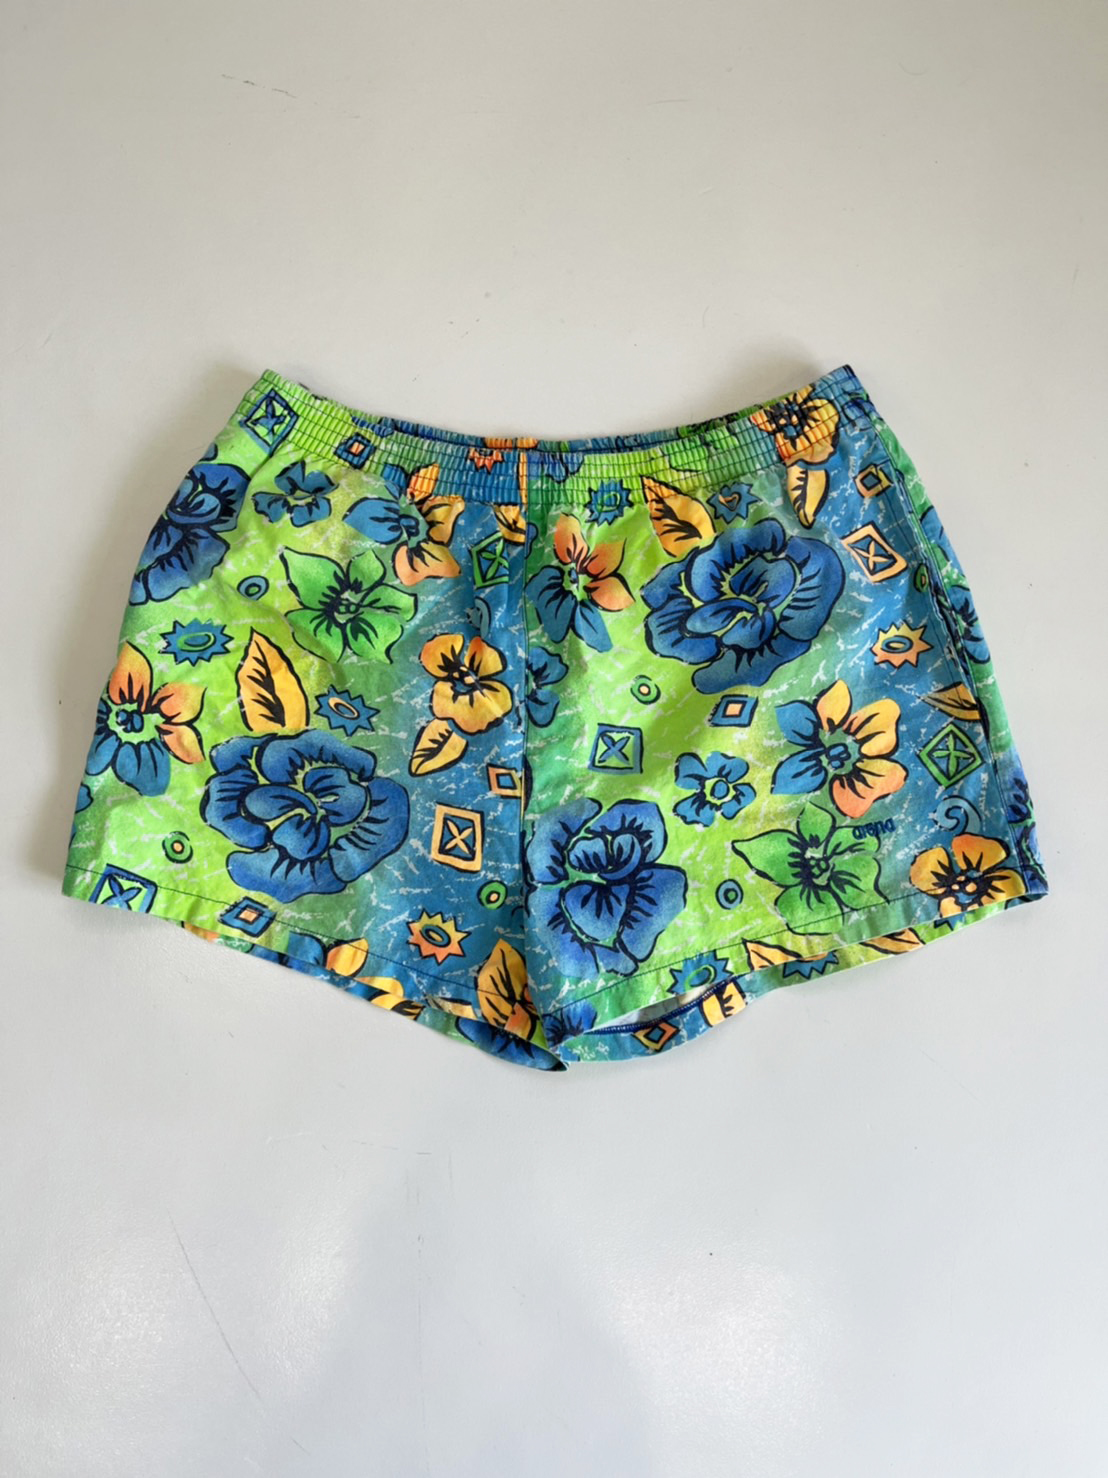 arena】Vintage Beach short Made in Italy 花柄 ビーチショーツ